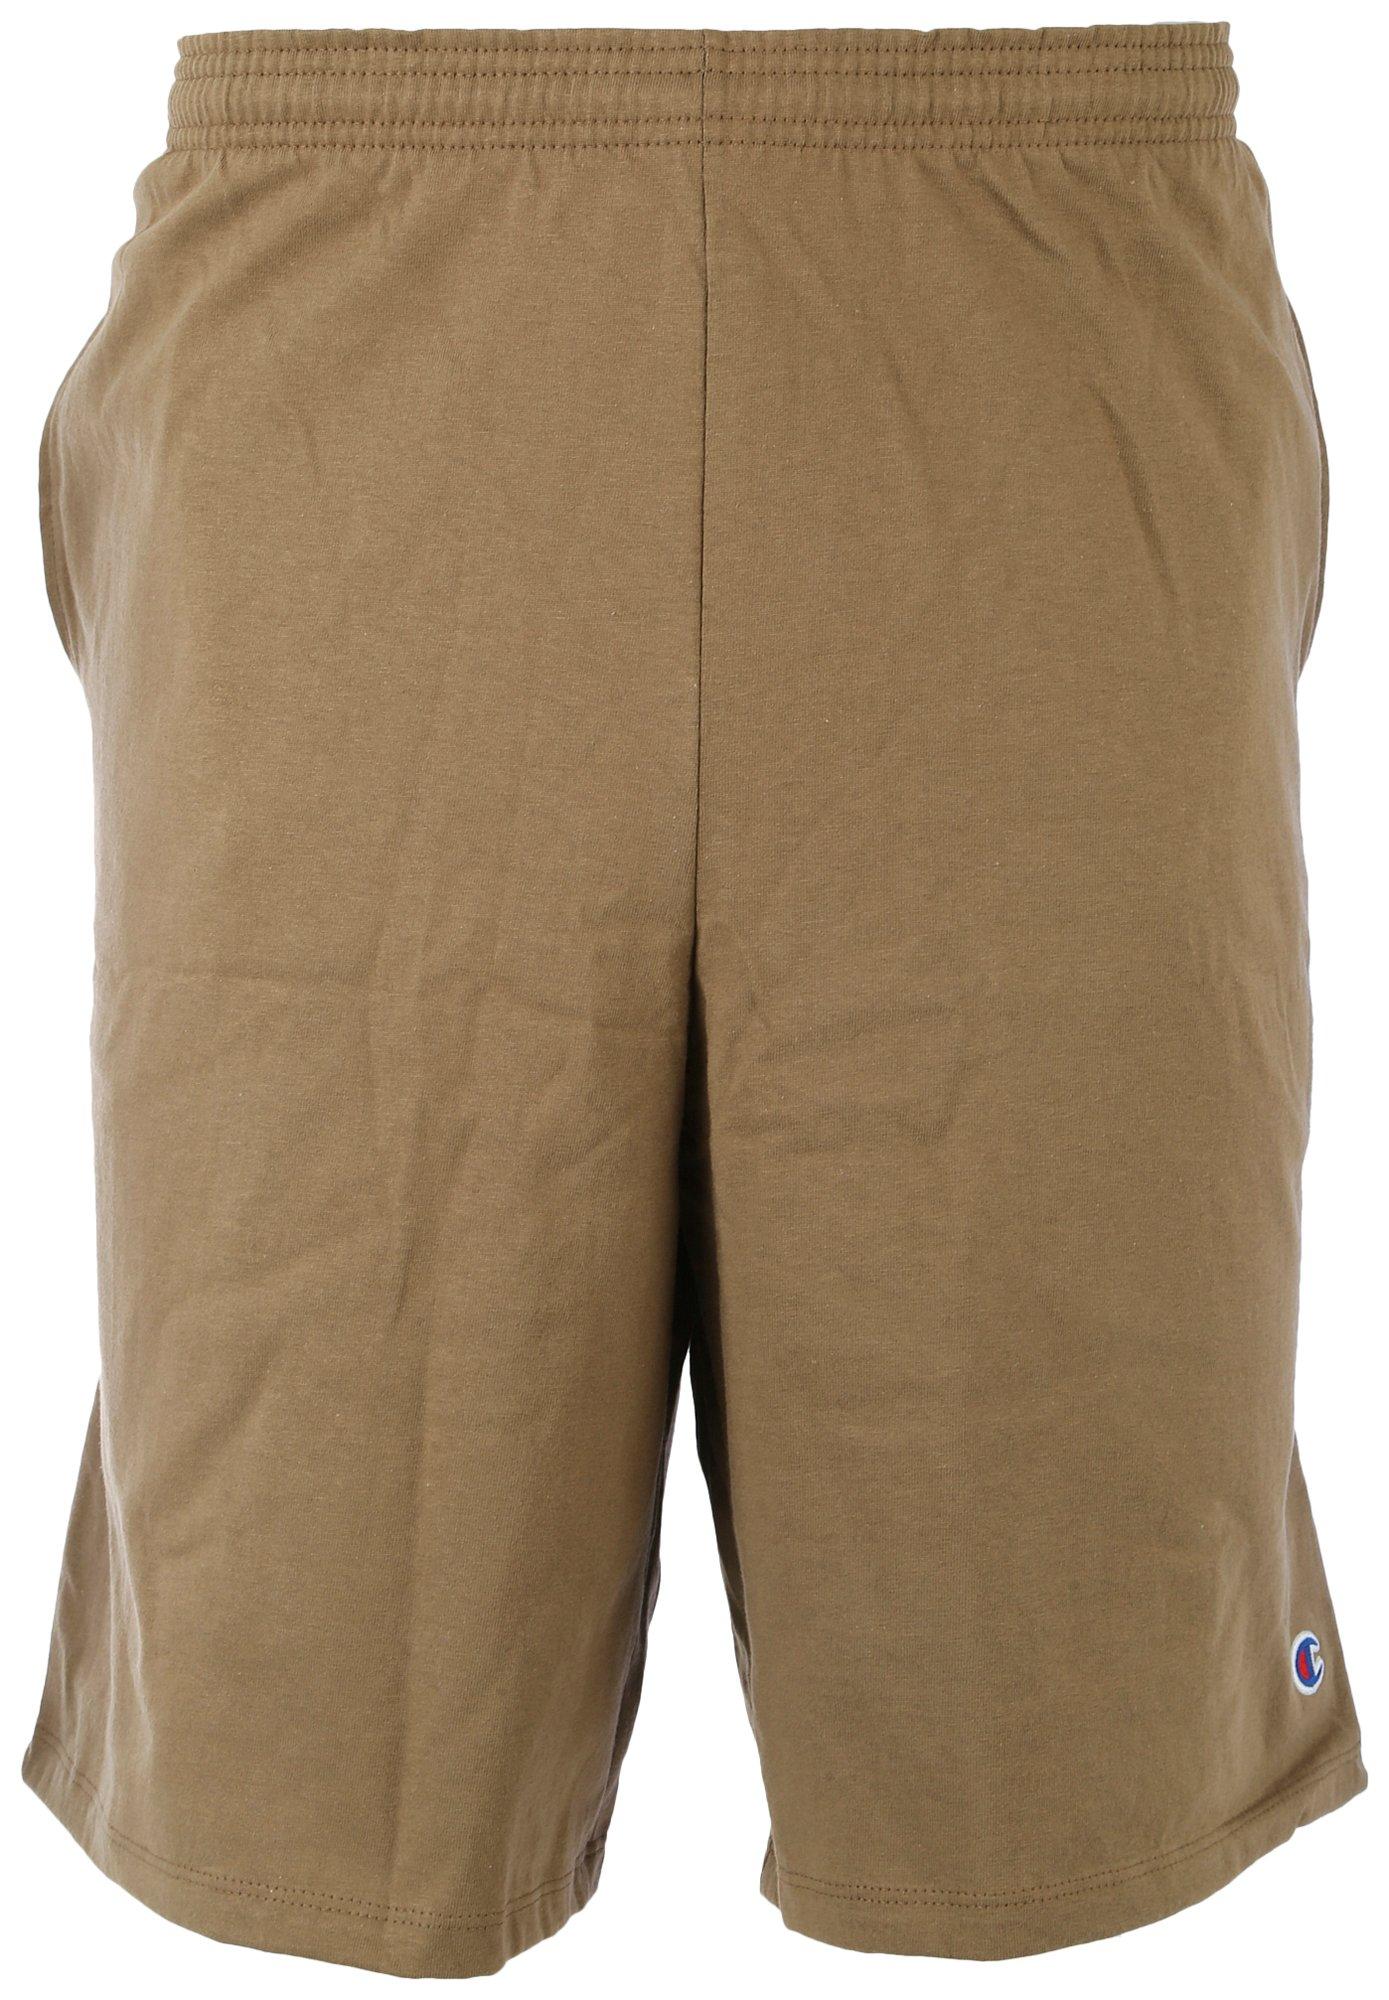 Champion Mens 9 in. Everyday Cotton Shorts